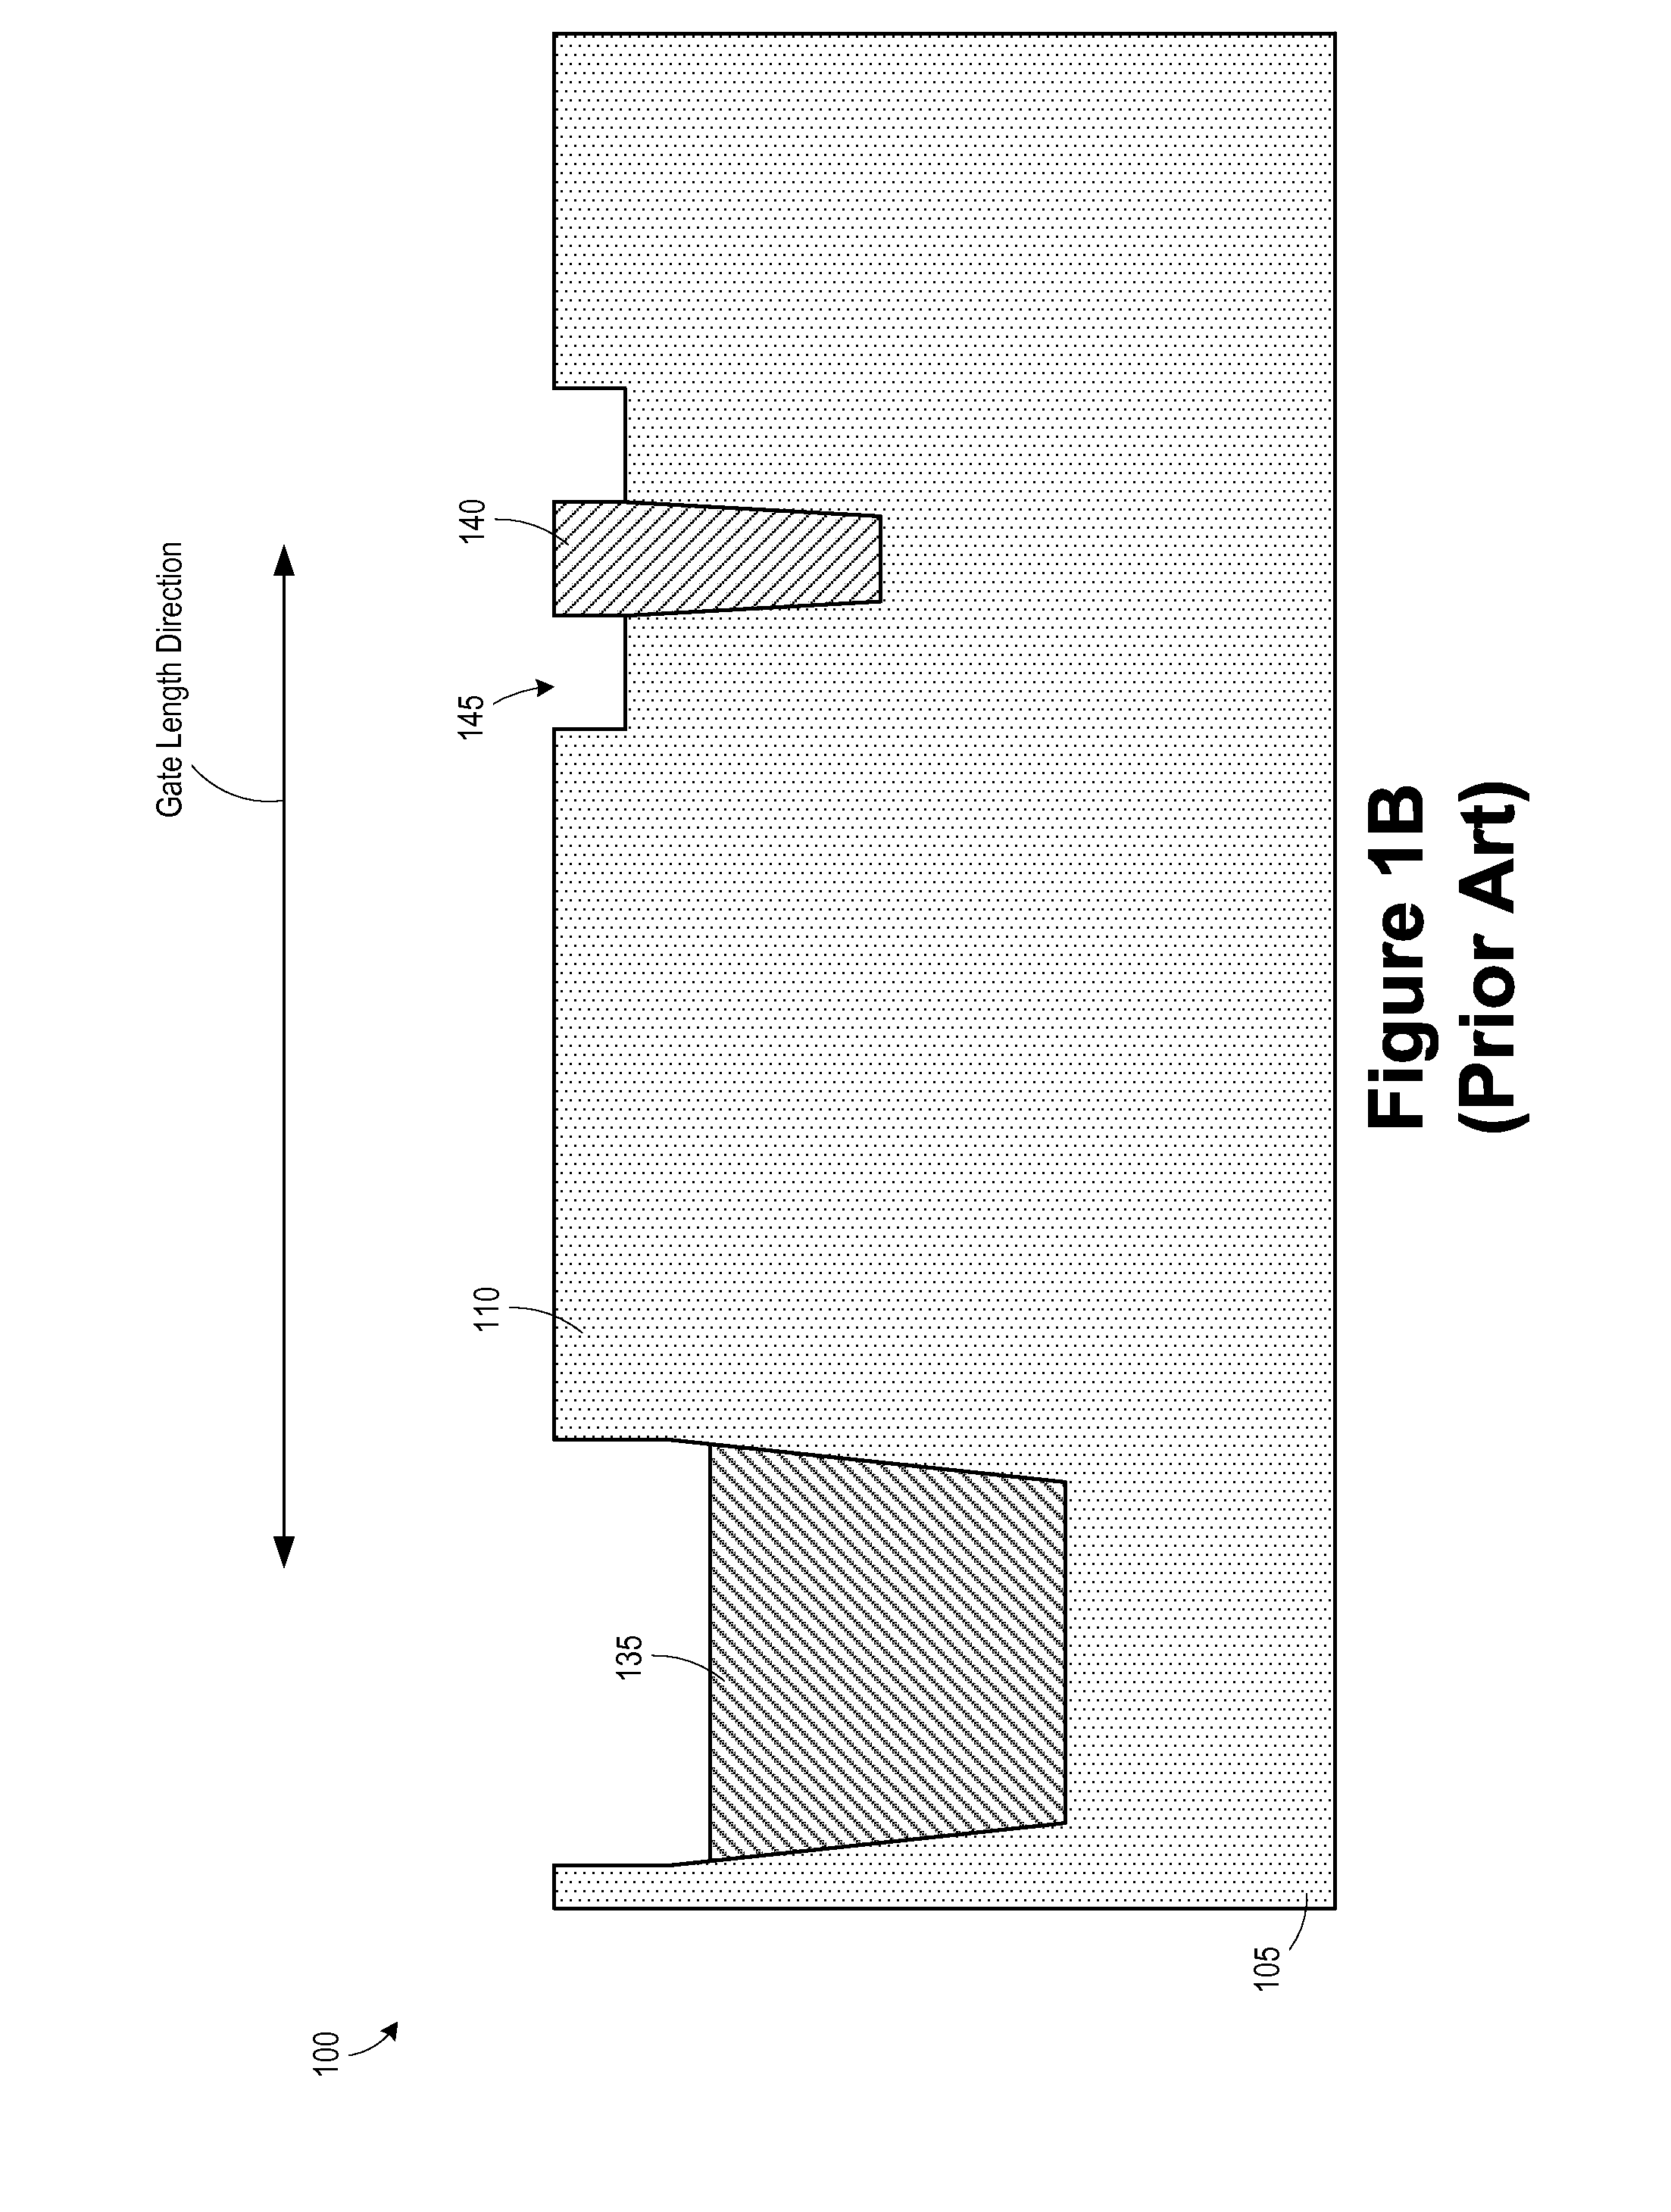 Method for forming single diffusion breaks between finfet devices and the resulting devices